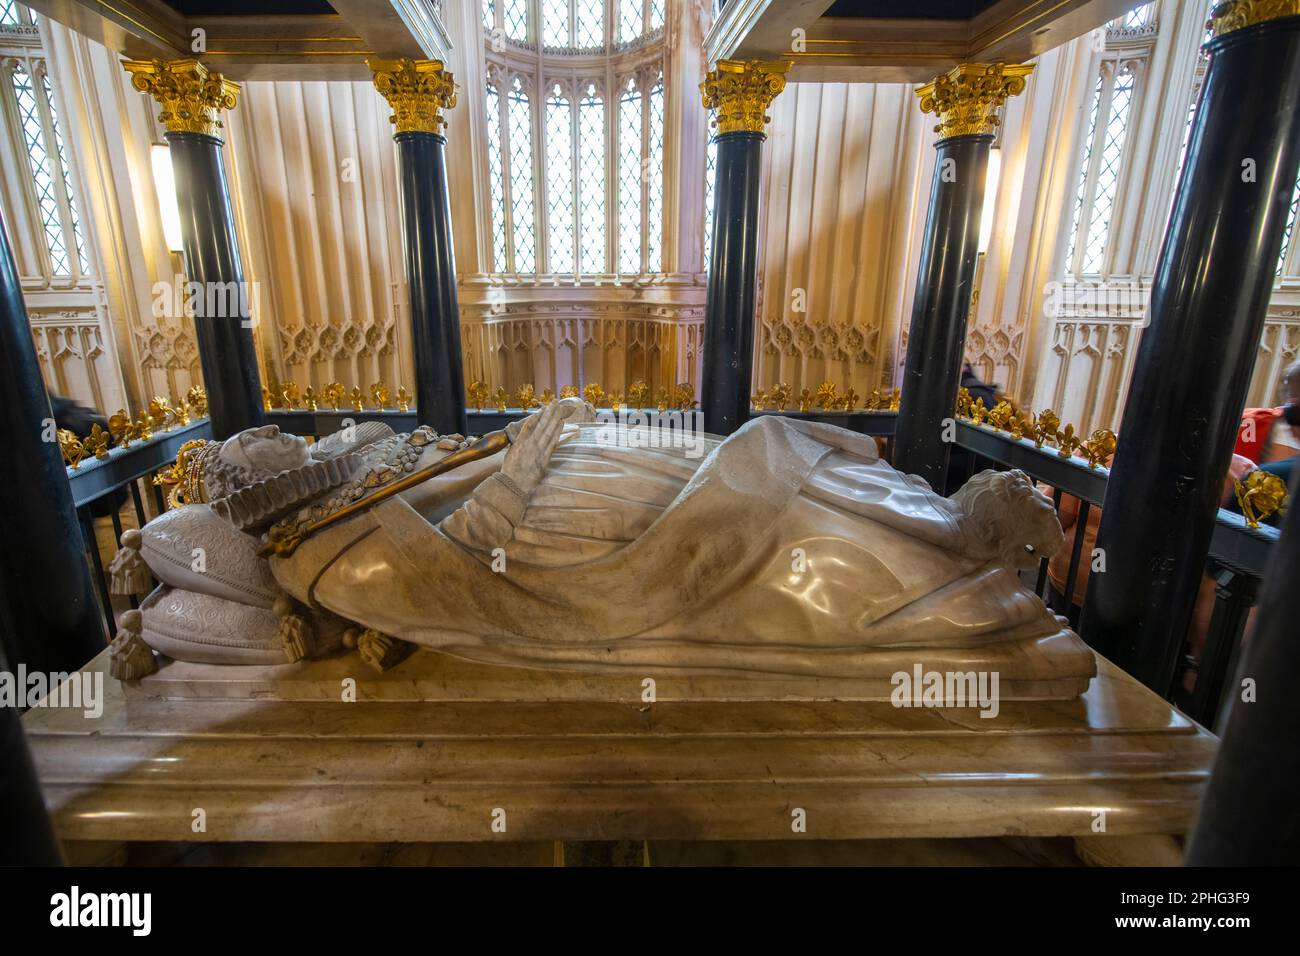 Elizabeth I tomb in Lady Chapel in Westminster Abbey. The church is UNESCO World Heritage Site located next to Palace of Westminster in city of Westmi Stock Photo